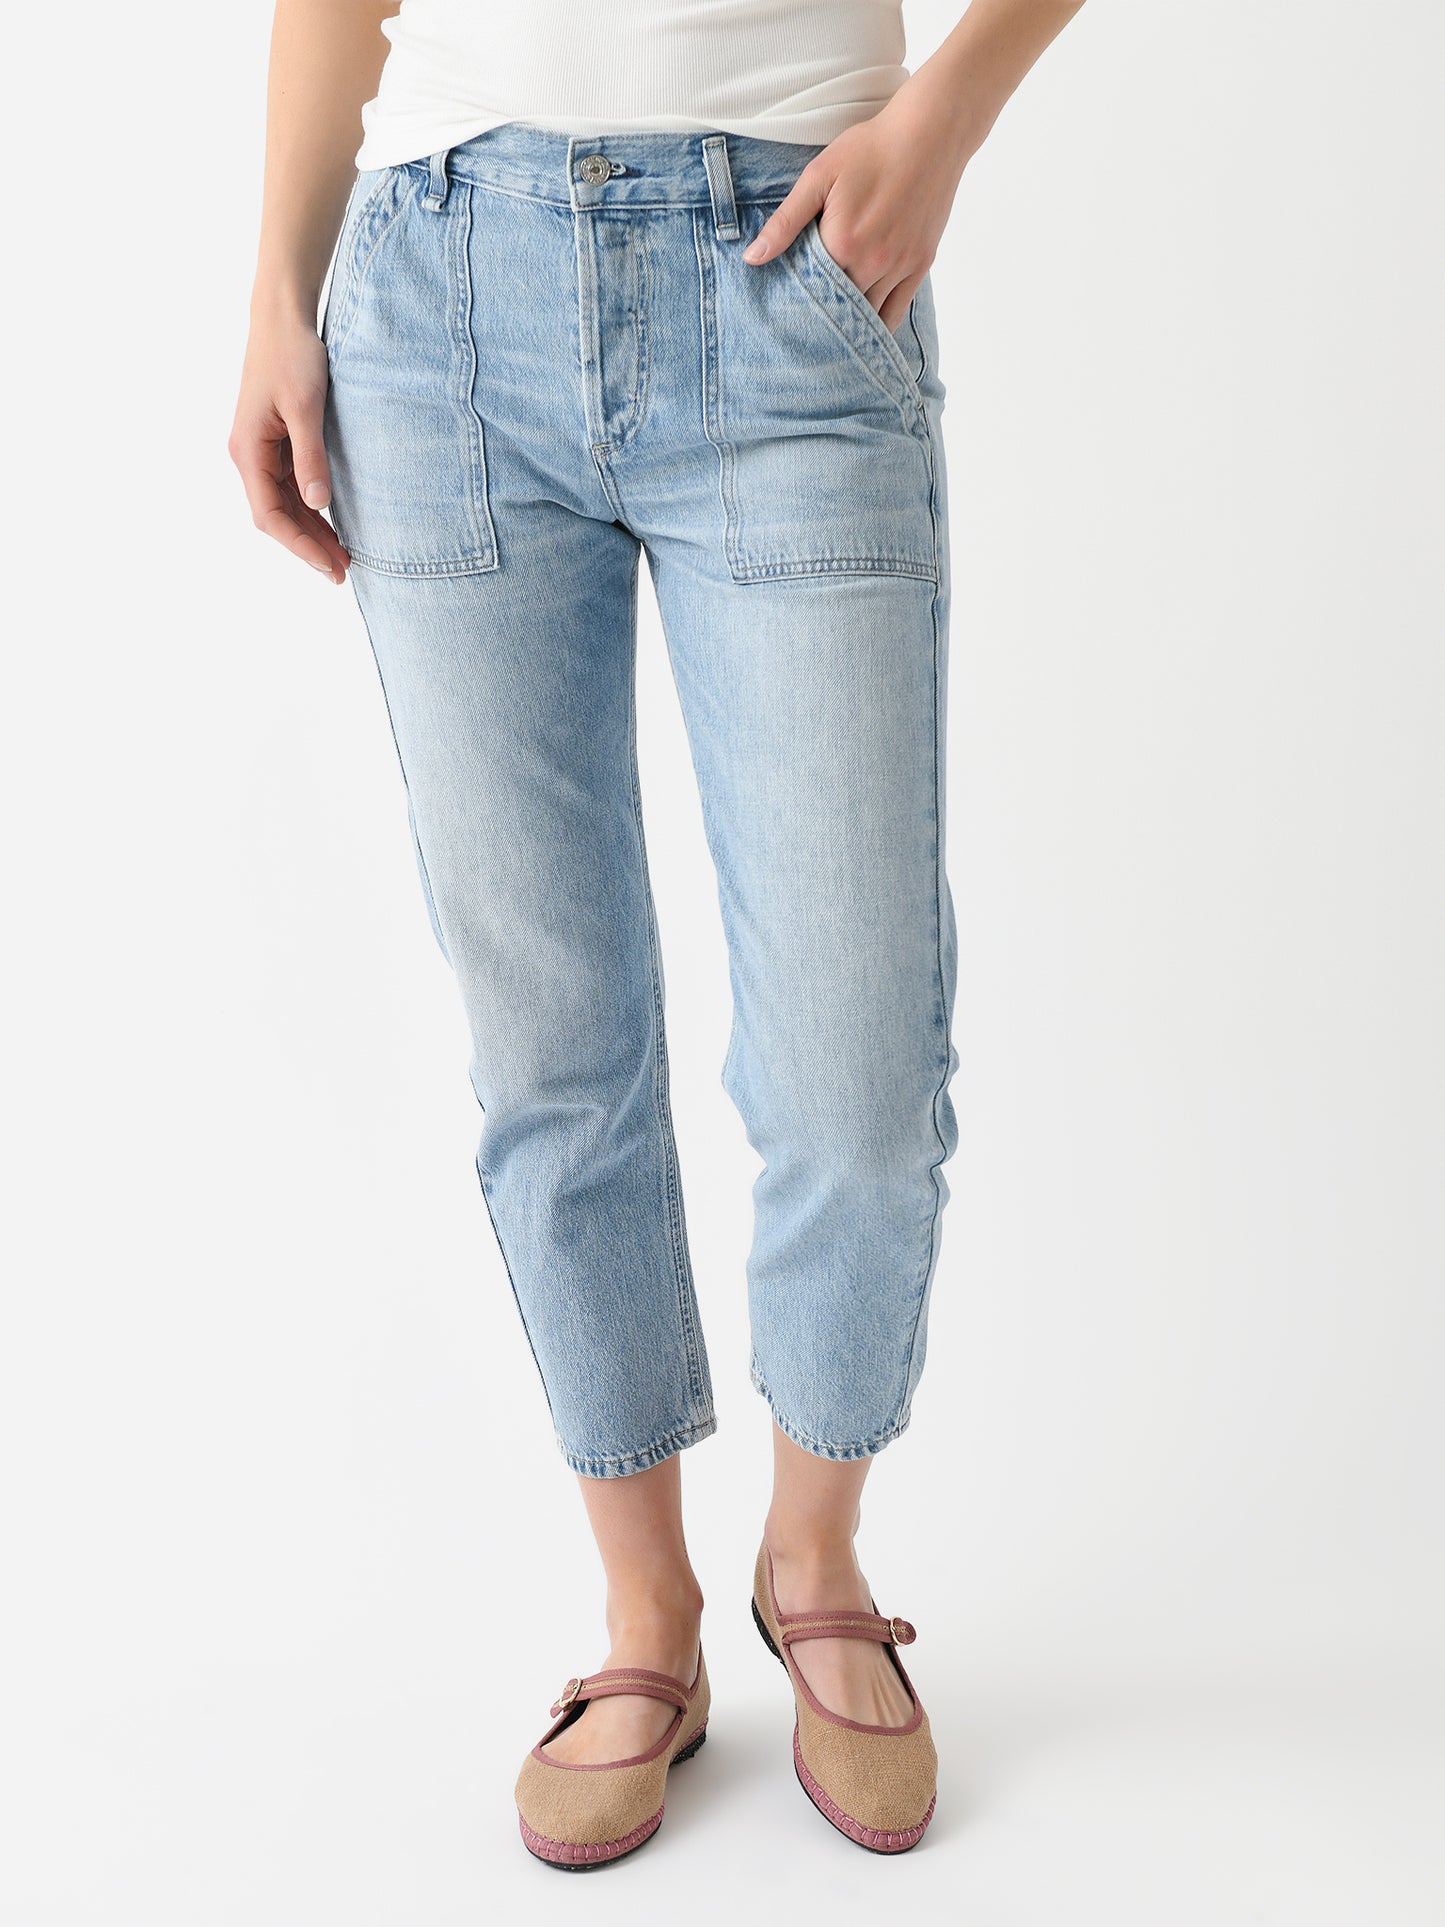 Citizens Of Humanity Women's Leah Cargo Jean